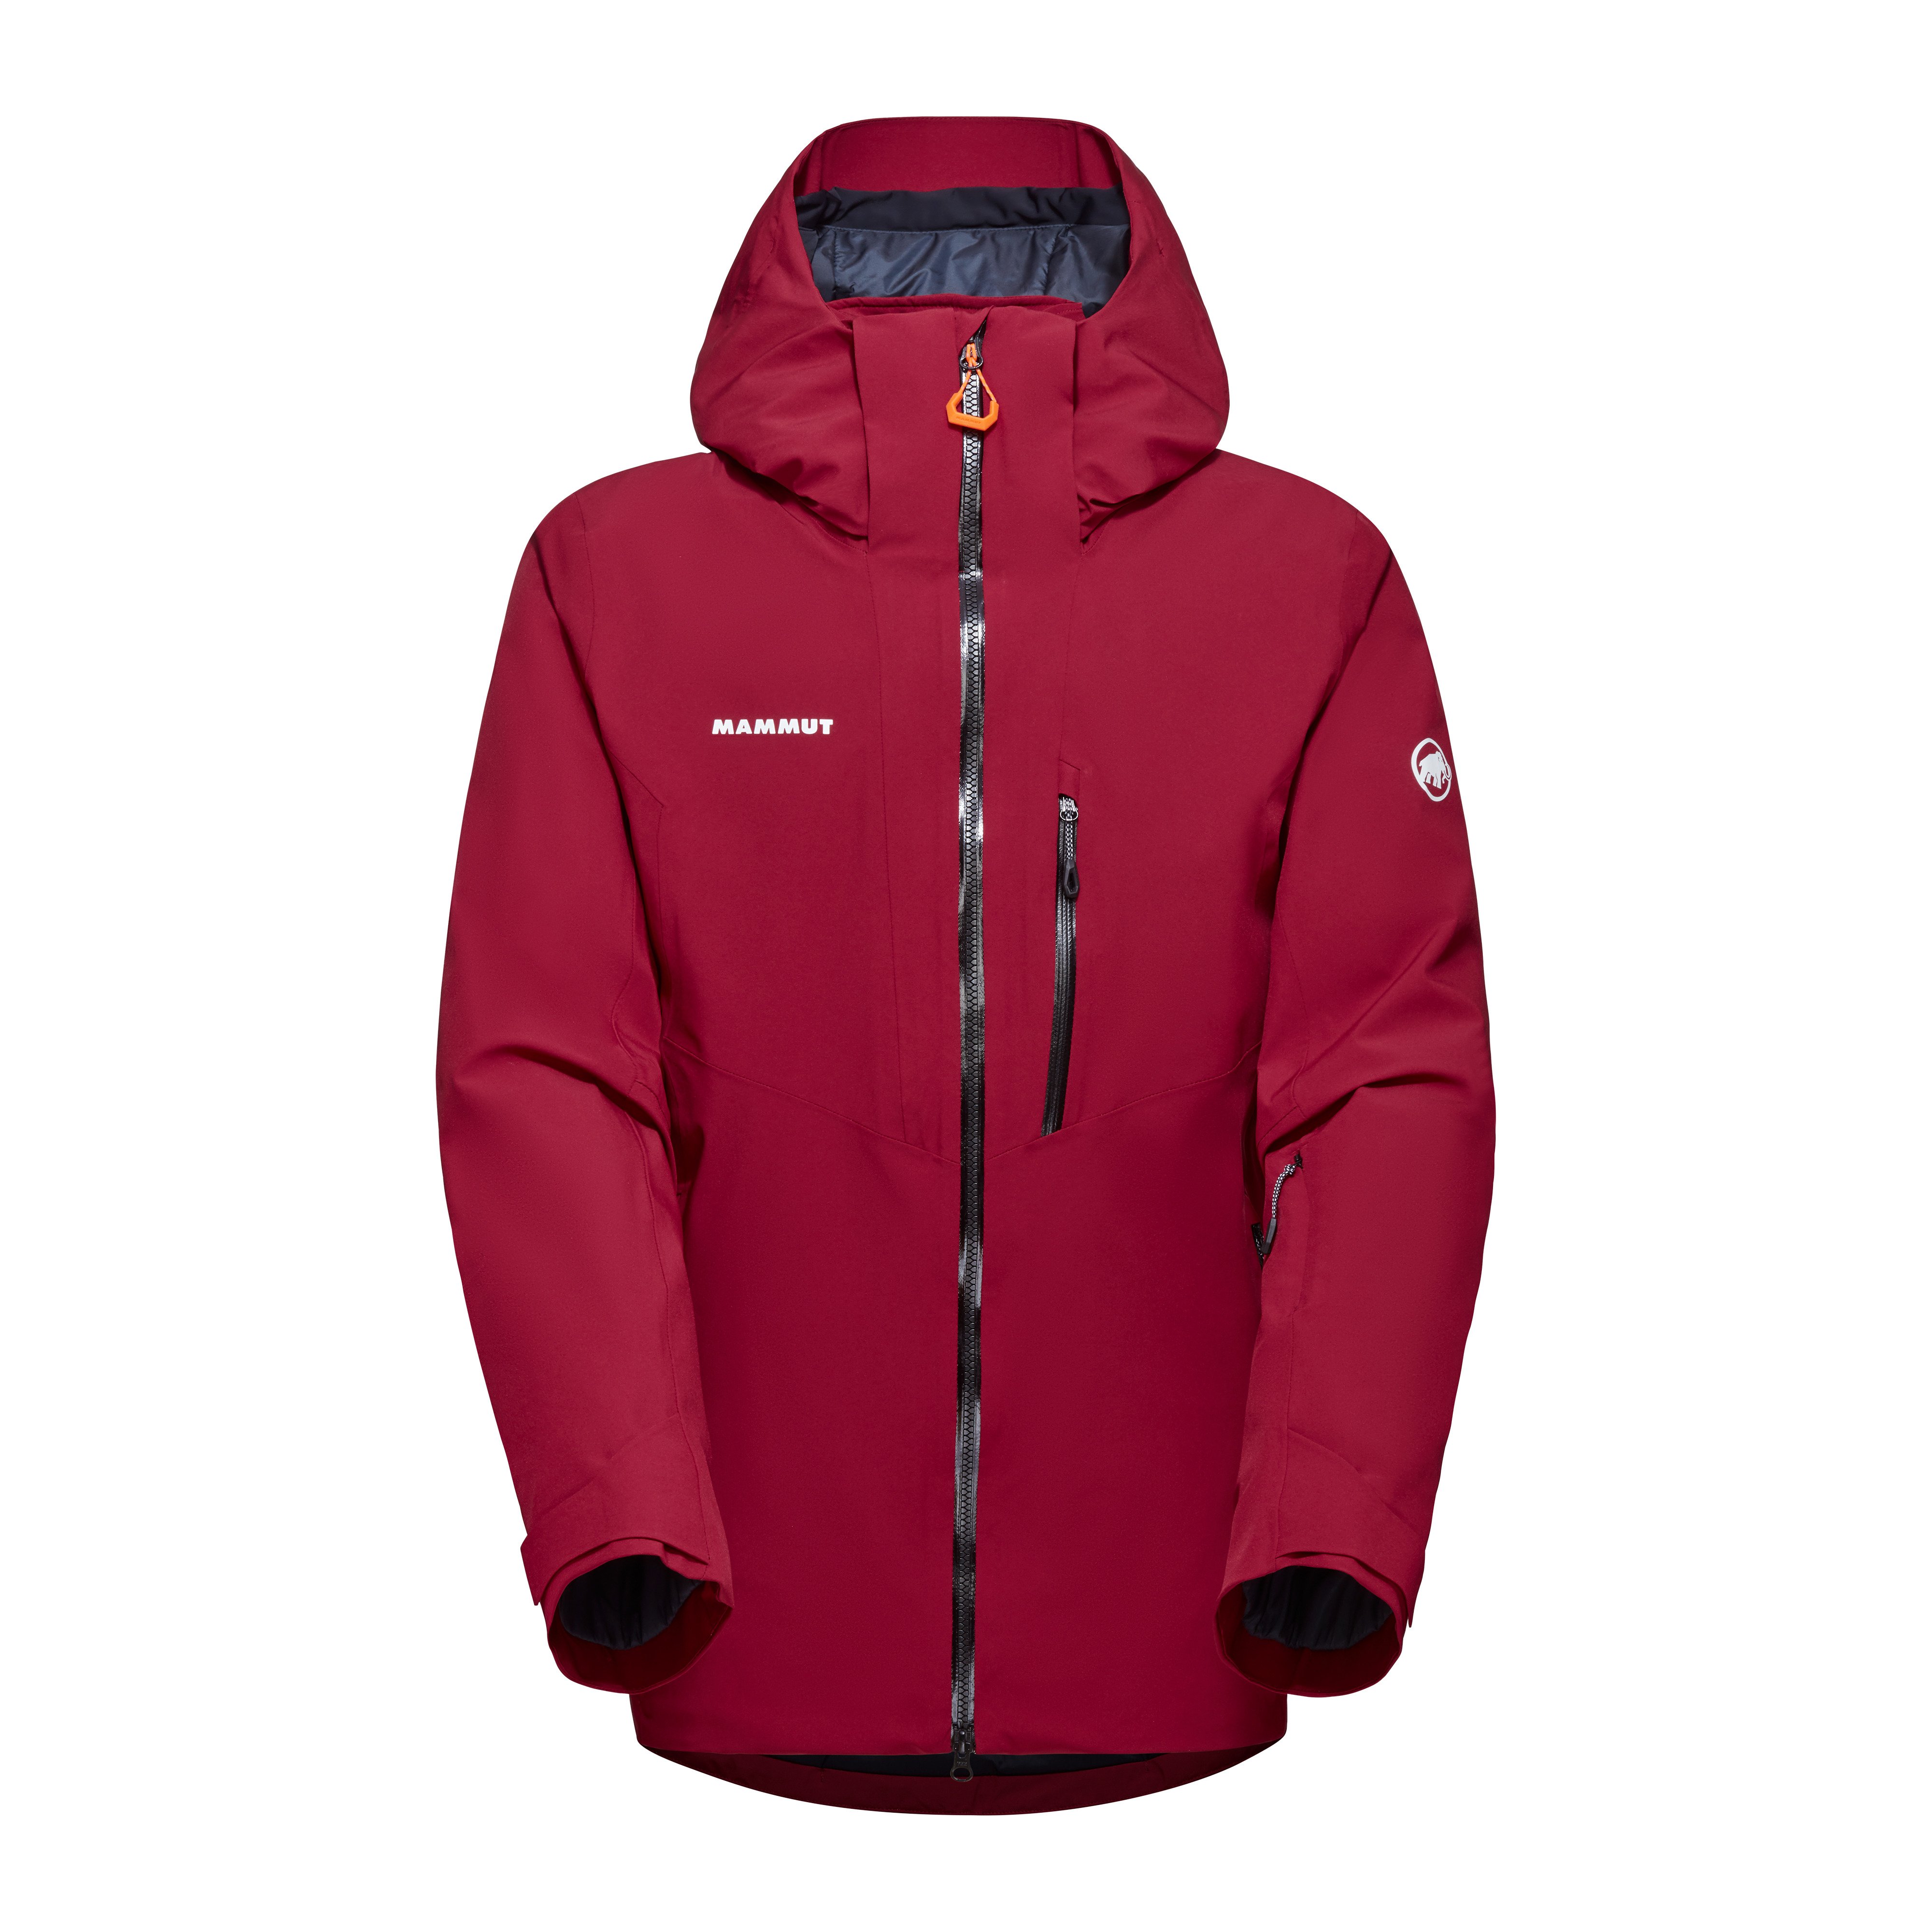 Stoney HS Thermo Jacket Men - blood red-black, S thumbnail